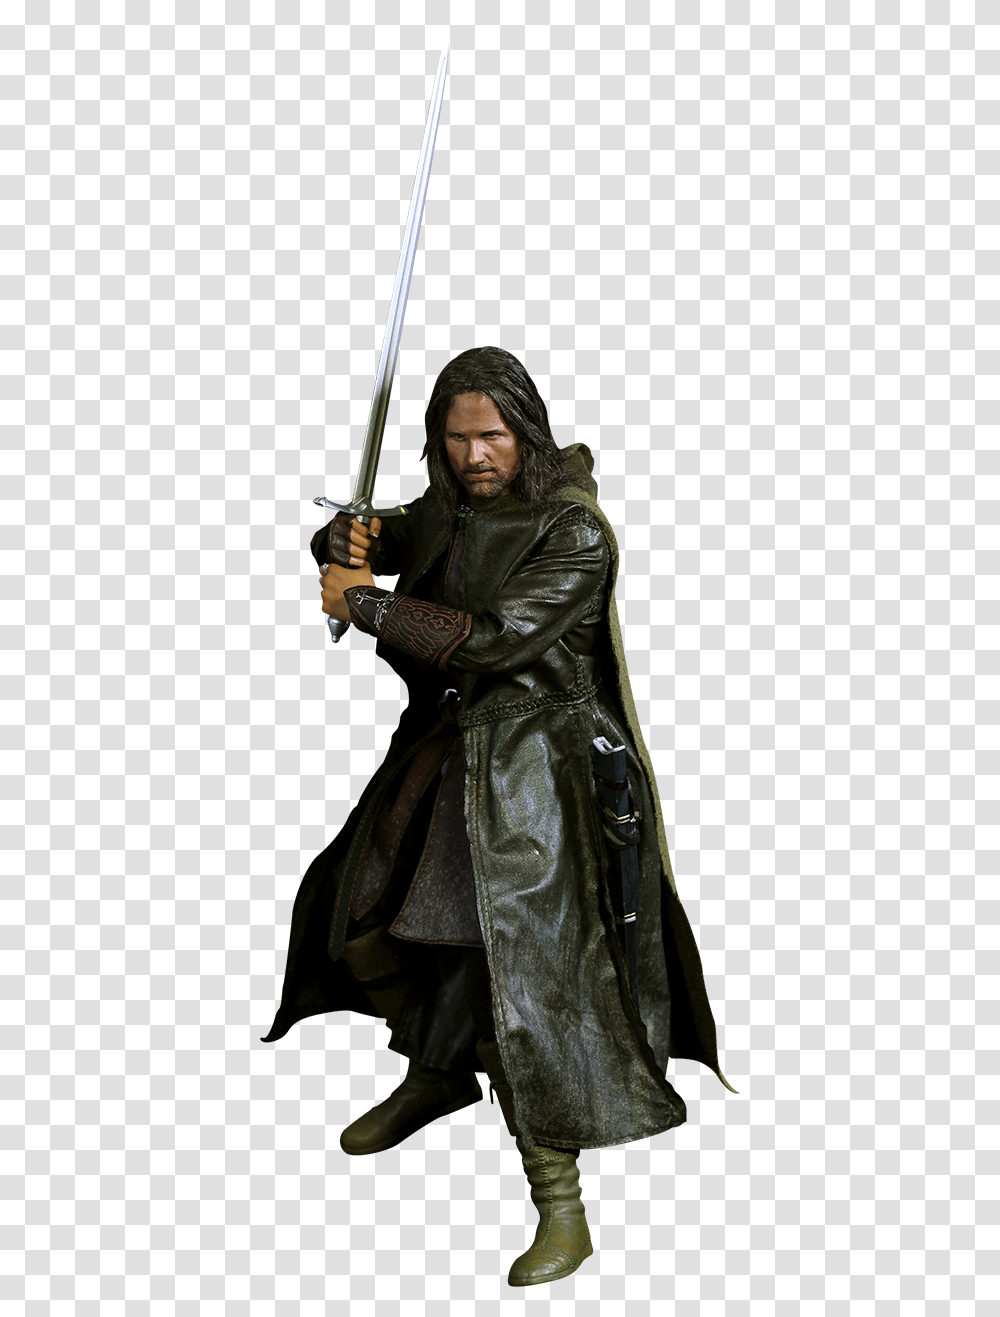 Hd Aragorn Lord Of The Rings Lord Of The Rings The Lord Of The Rings Aragorn, Coat, Person, Jacket Transparent Png